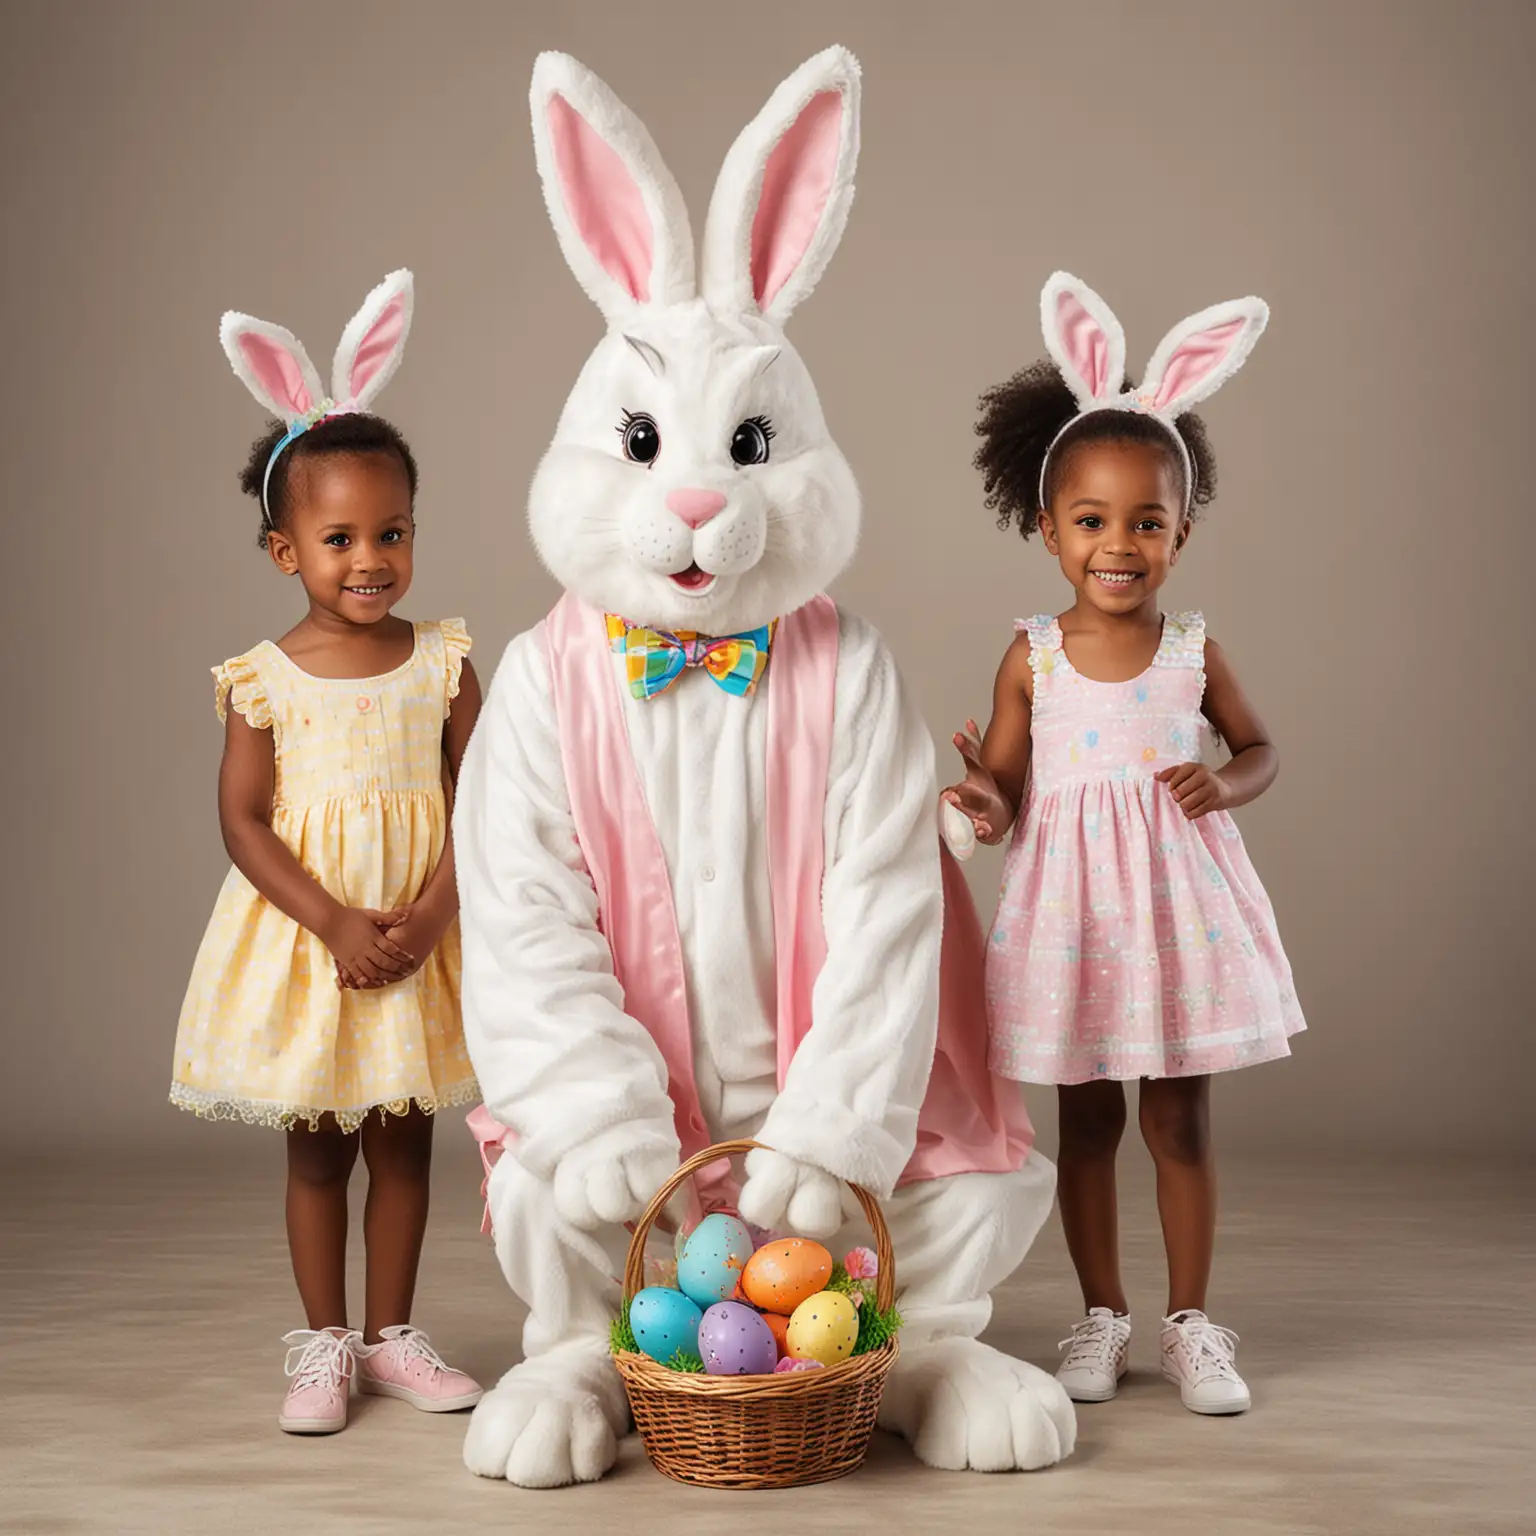 Easter Bunny with Two African American Kids Celebrating Easter Joyfully